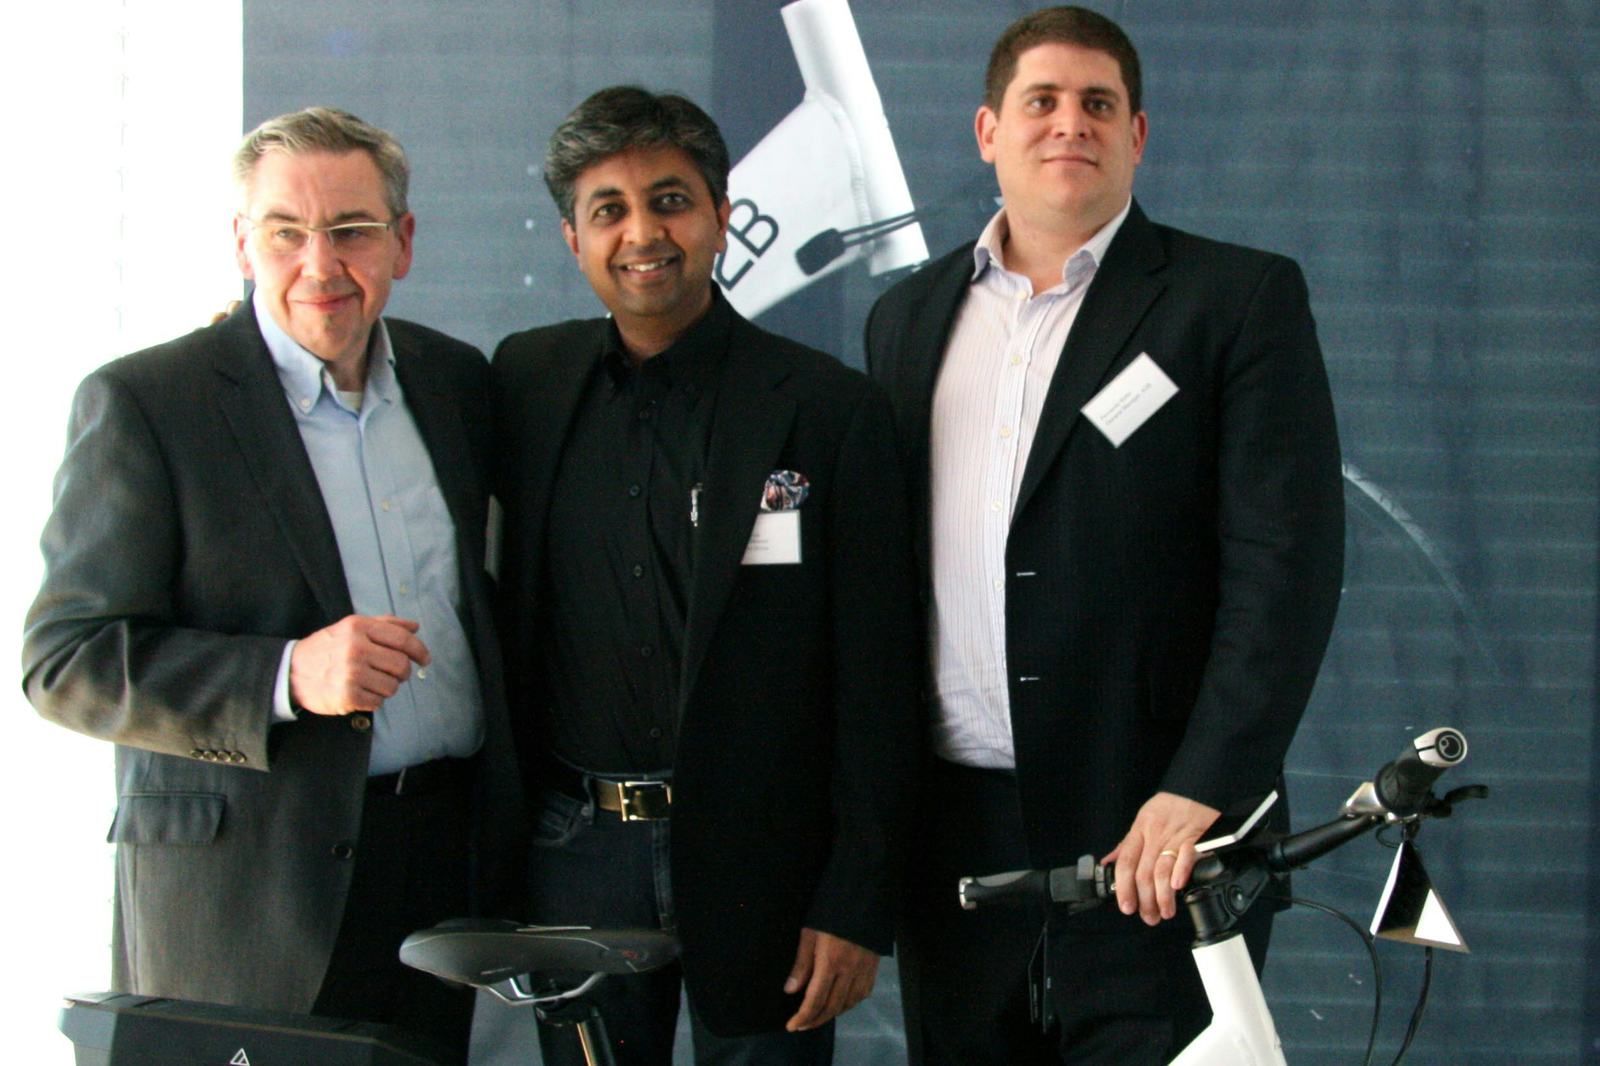 Relaunching the former Ultra Motor e-bike brand A2B and now owned by Hero Group (one of the world’s biggest two-wheeler makers) with from left to right: HeroEco Ltd. country manager Horst Schuster, Hero Eco Group MD Naveen Munjal und HeroEco Ltd. GM Fernando Küfer. - Photo Jo Beckendorff
